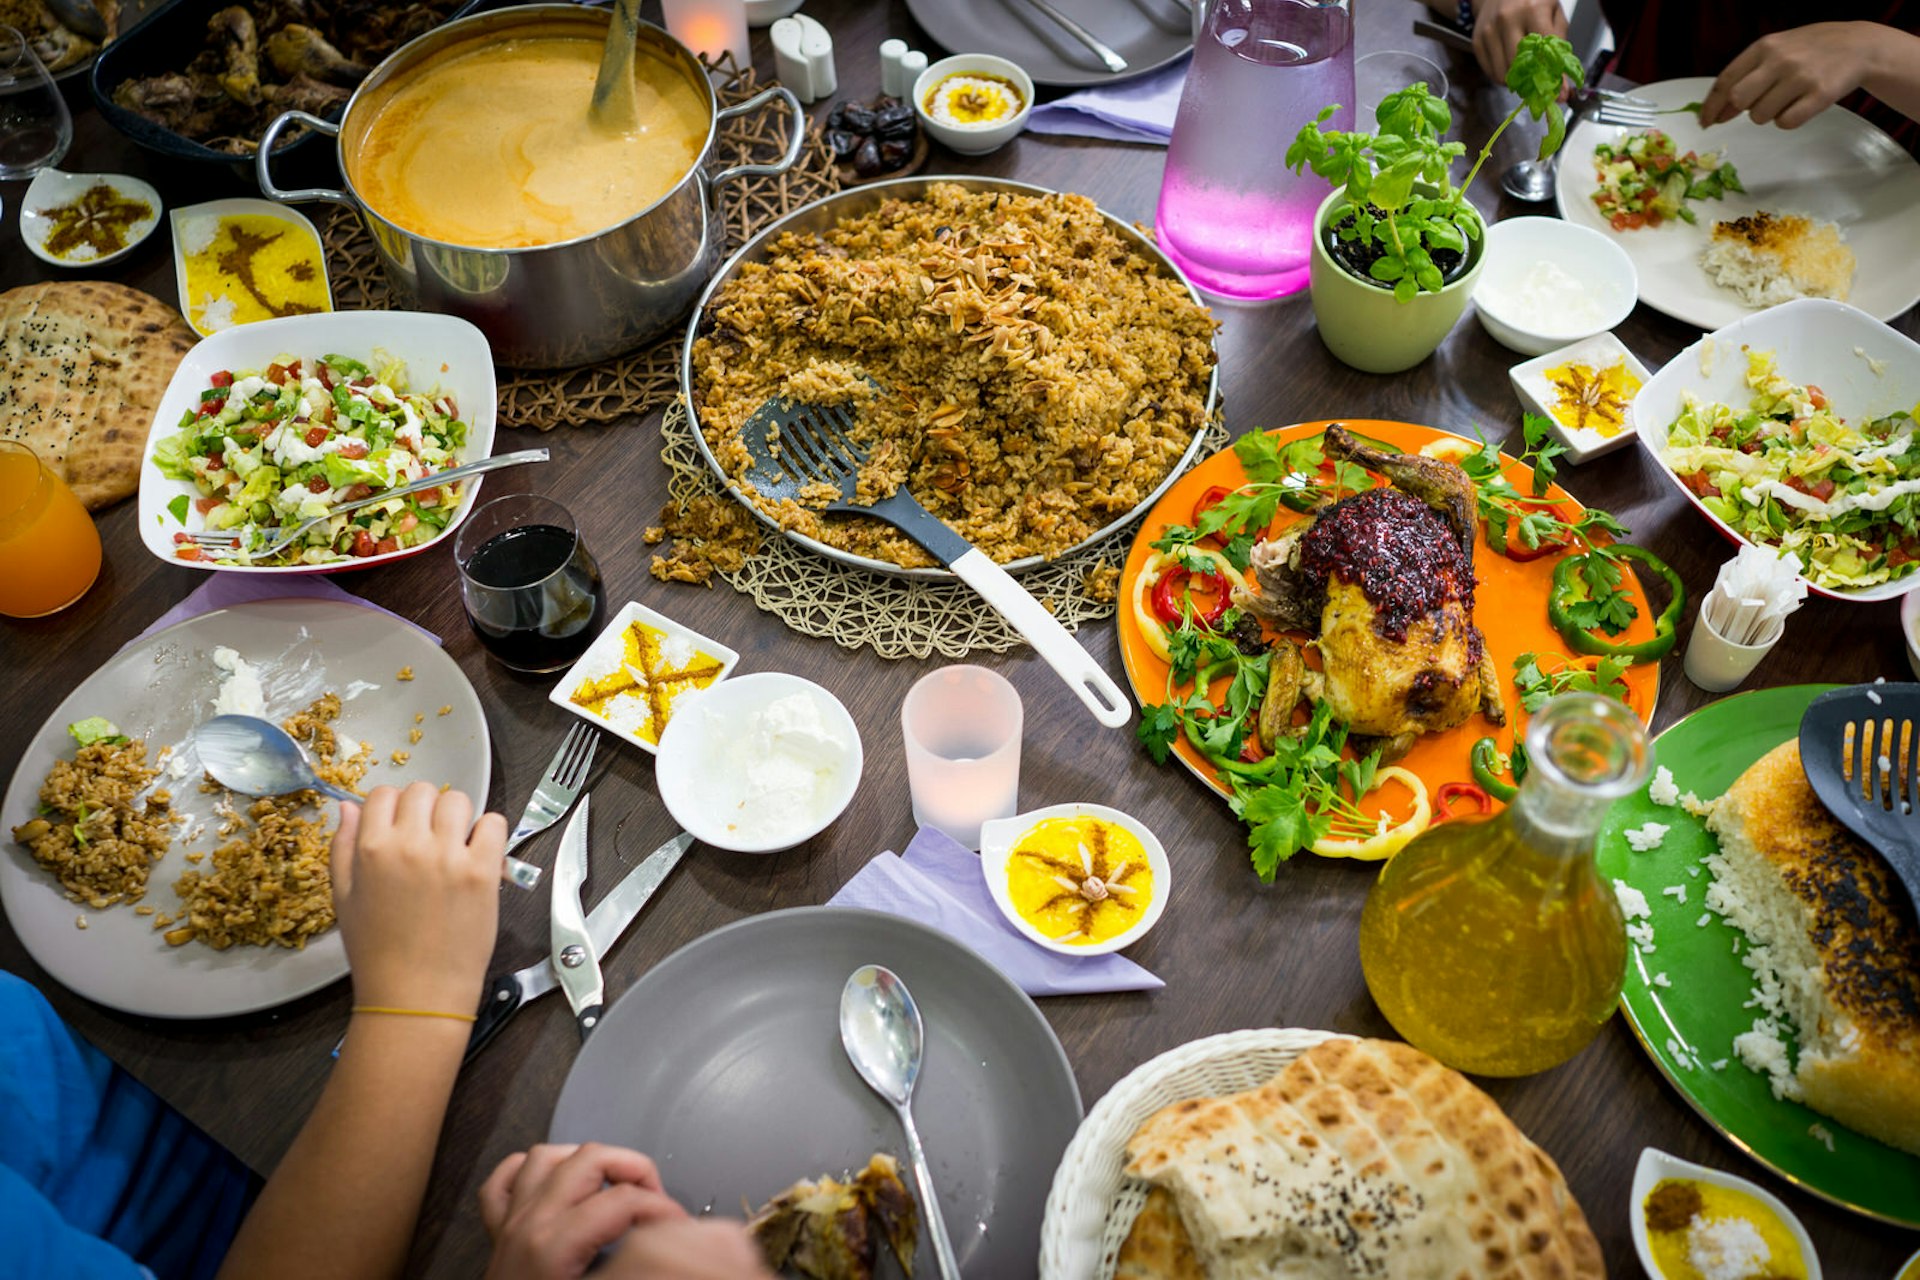 Table filled with Middle Eastern dishes, such as salads, pita bread and rice